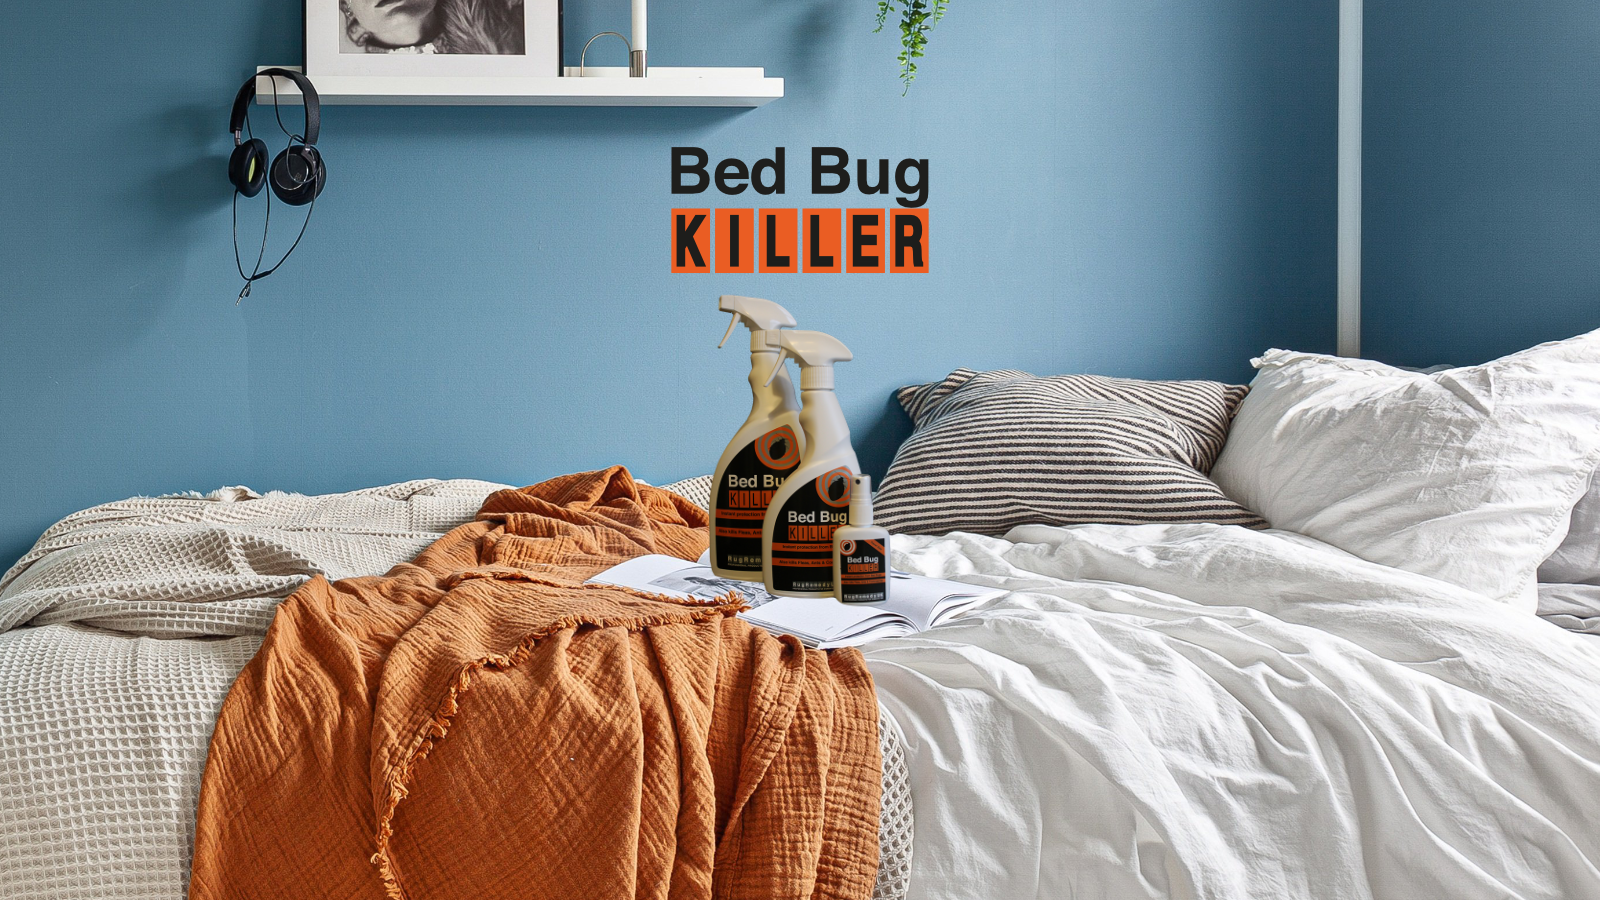 Image of an unmade bed with Bed Bug Killer bottles and the caption 